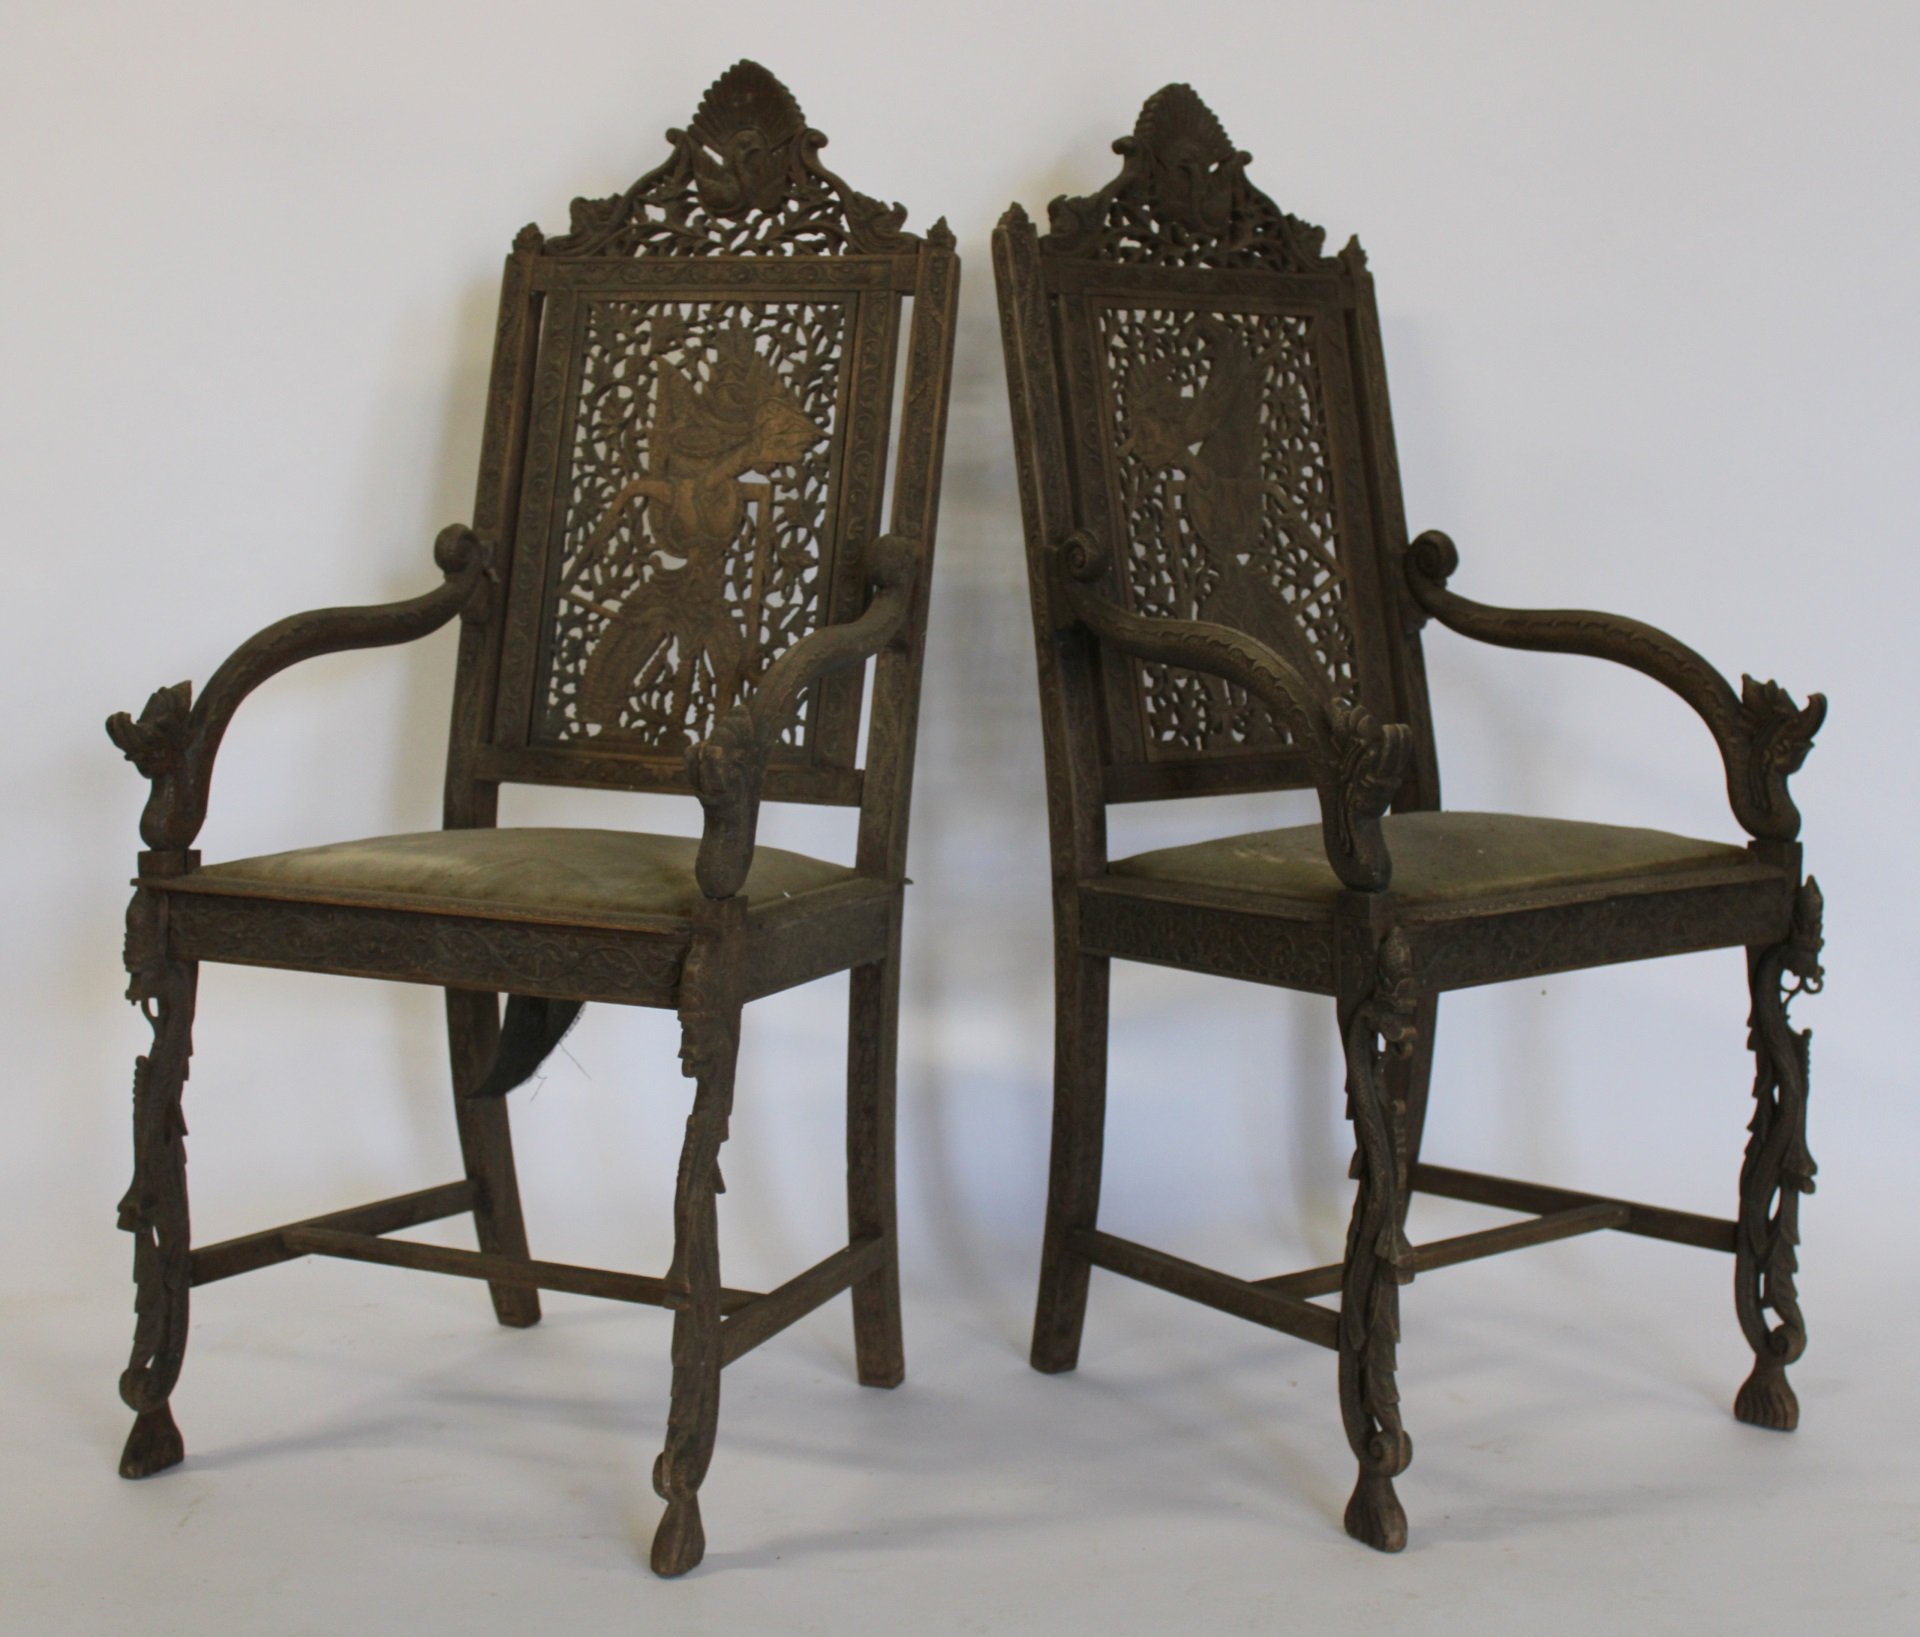 ANTIQUE PAIR OF FINELY CARVED SOUTH